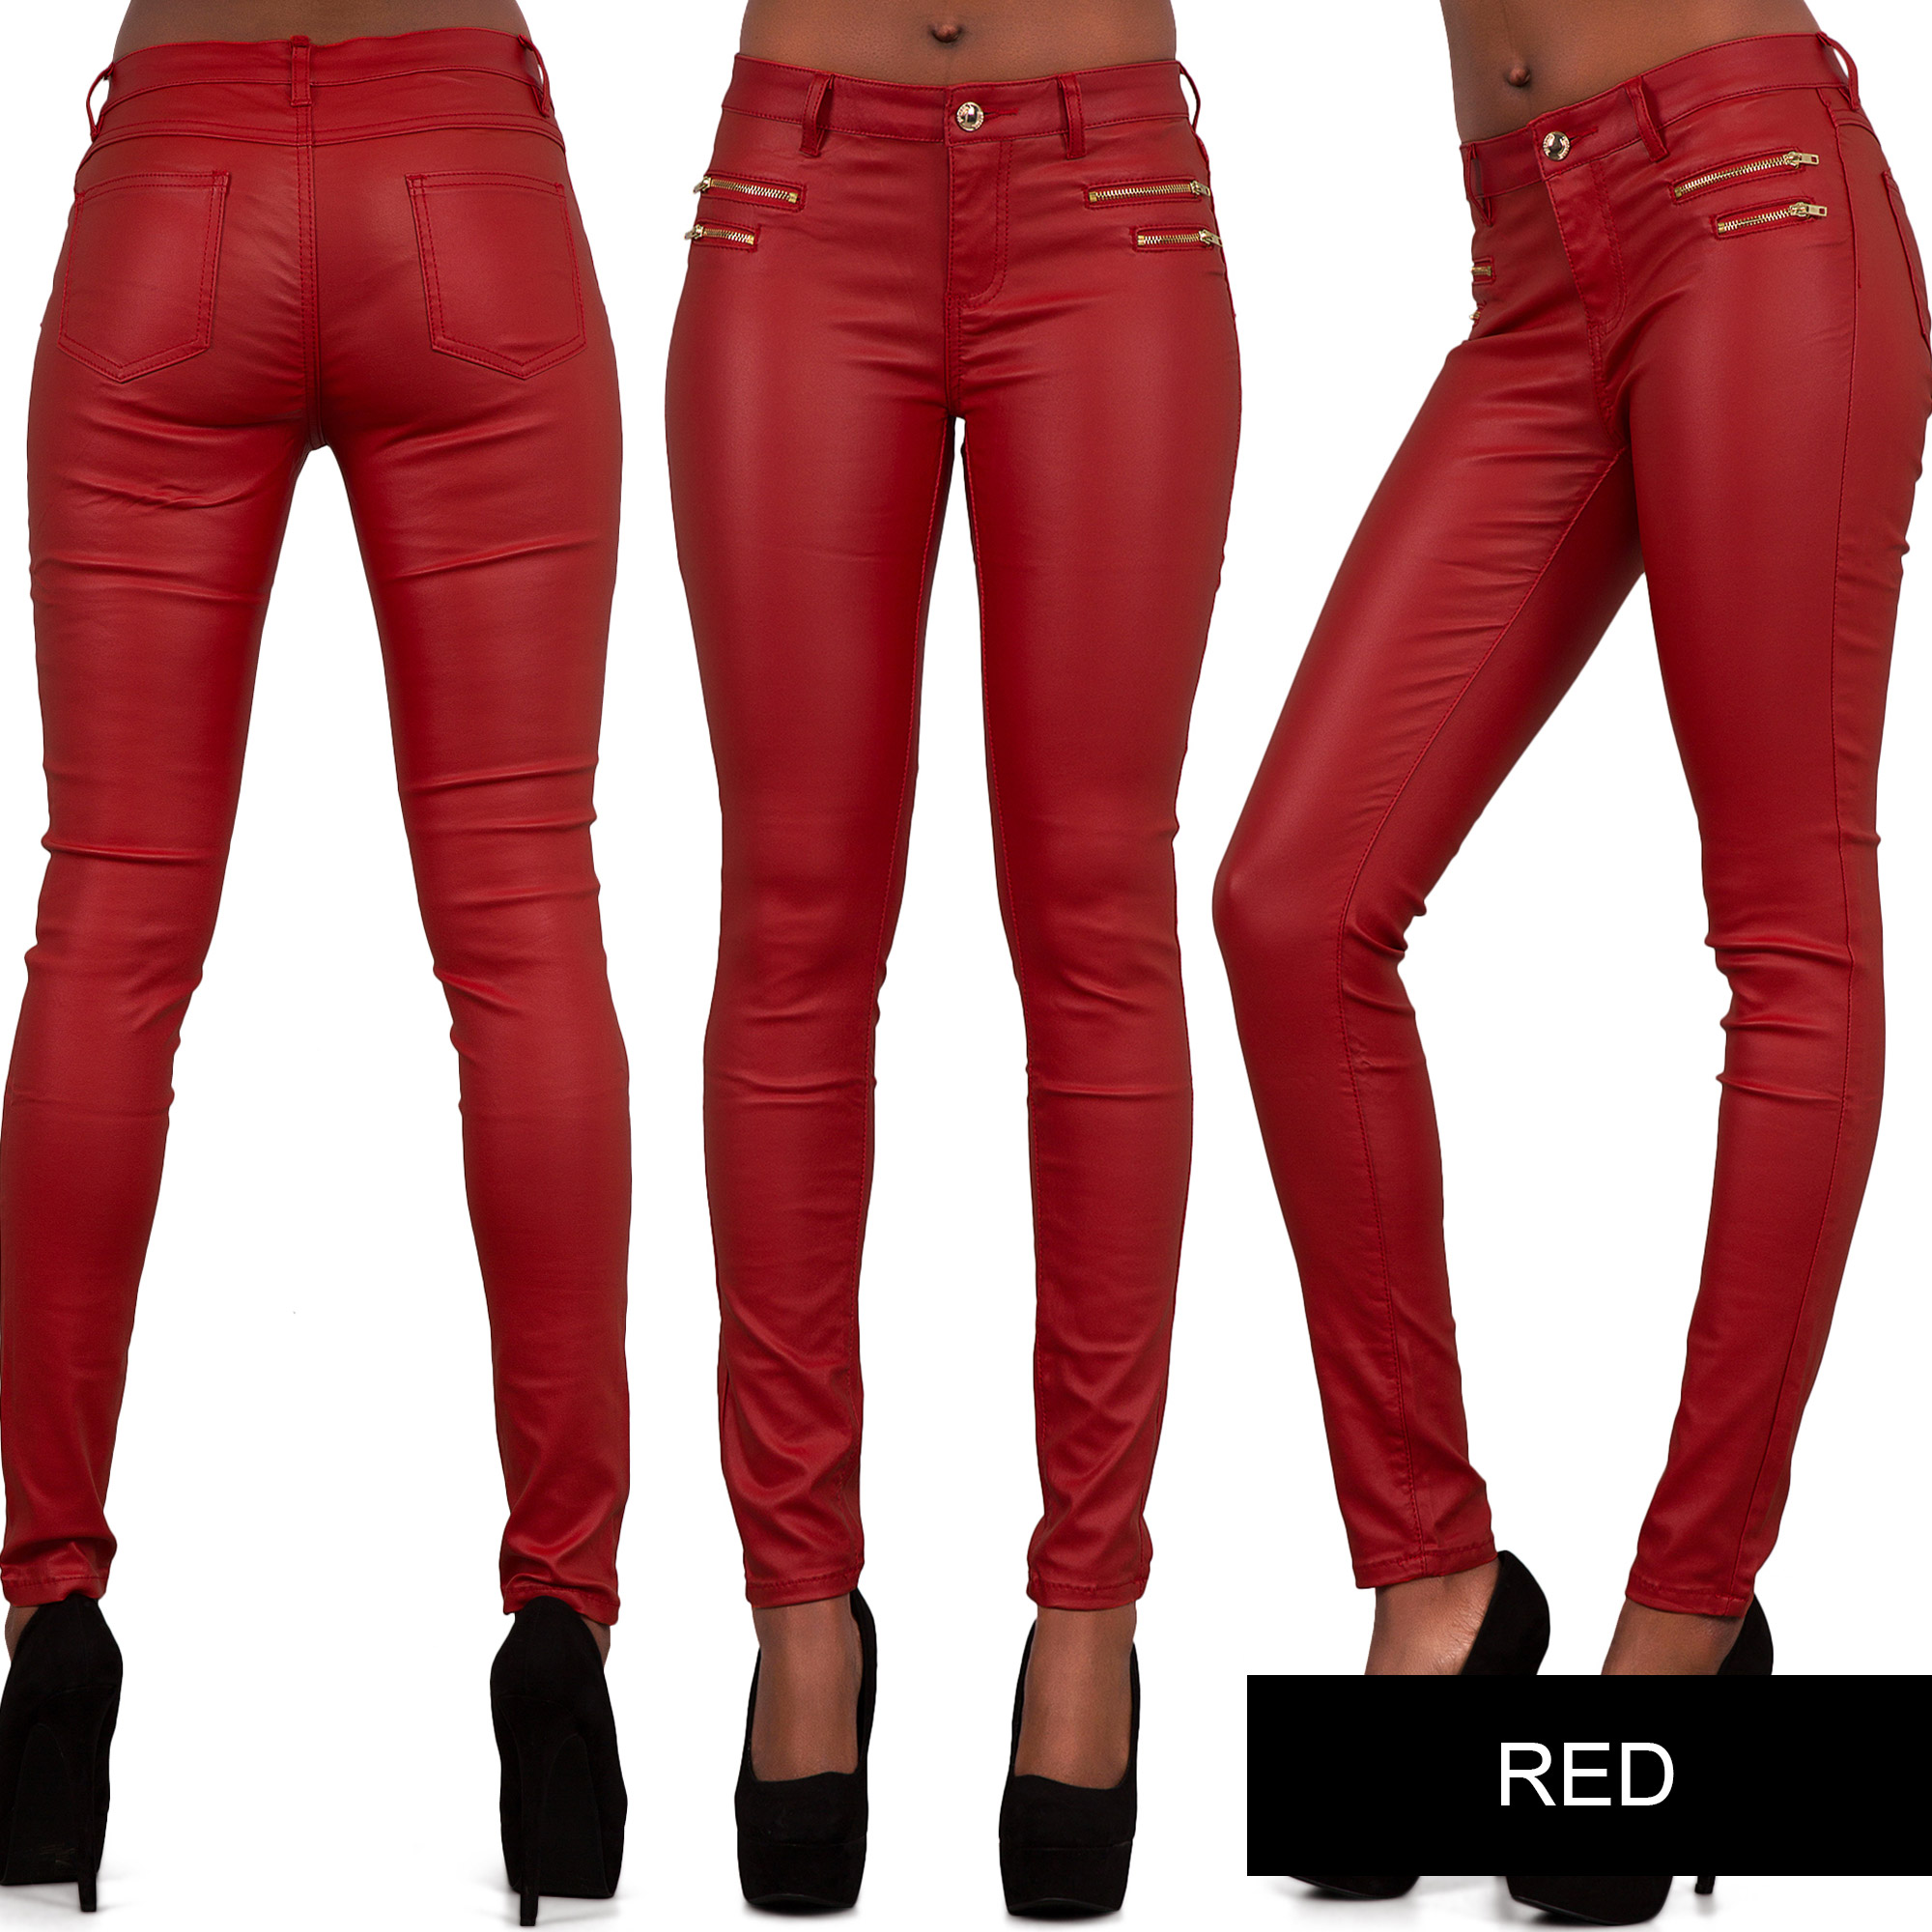 red wet look jeans